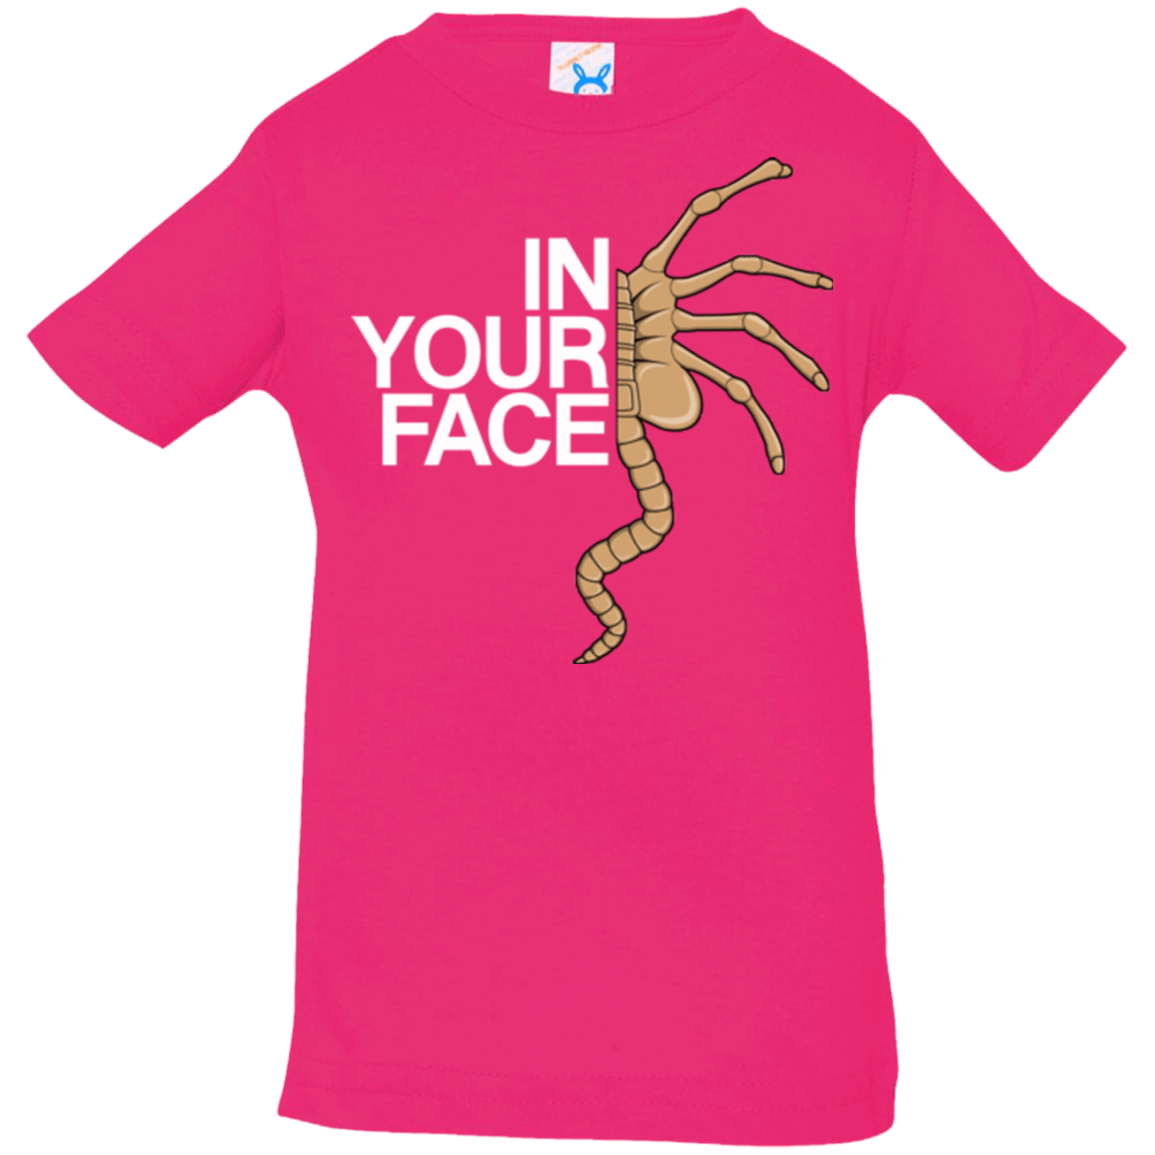 T-Shirts Hot Pink / 6 Months IN YOUR FACE Infant Premium T-Shirt